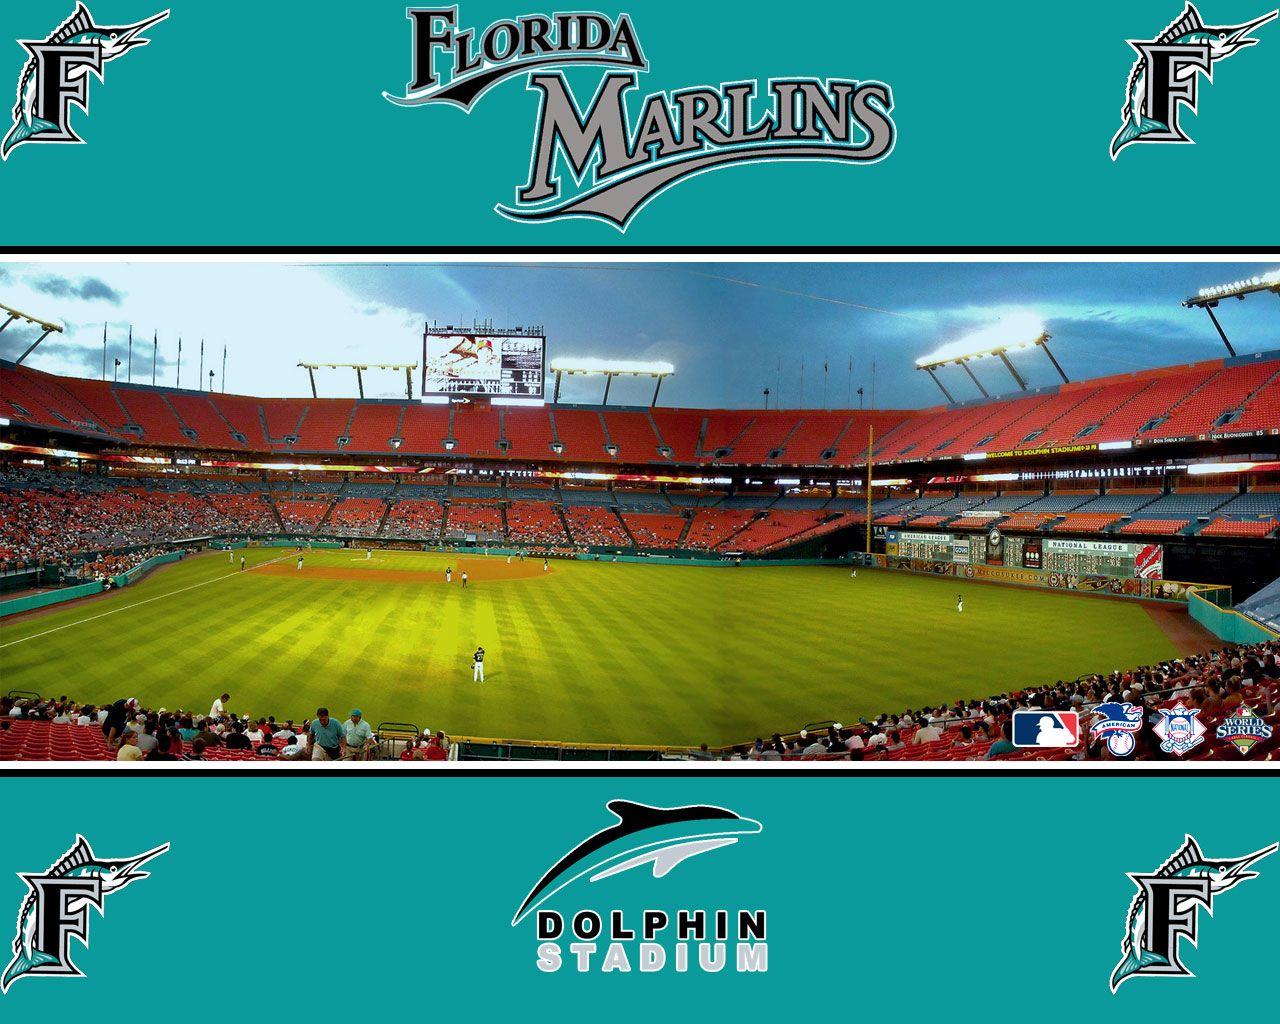 Florida Marlins wallpaper by eddy0513 - Download on ZEDGE™